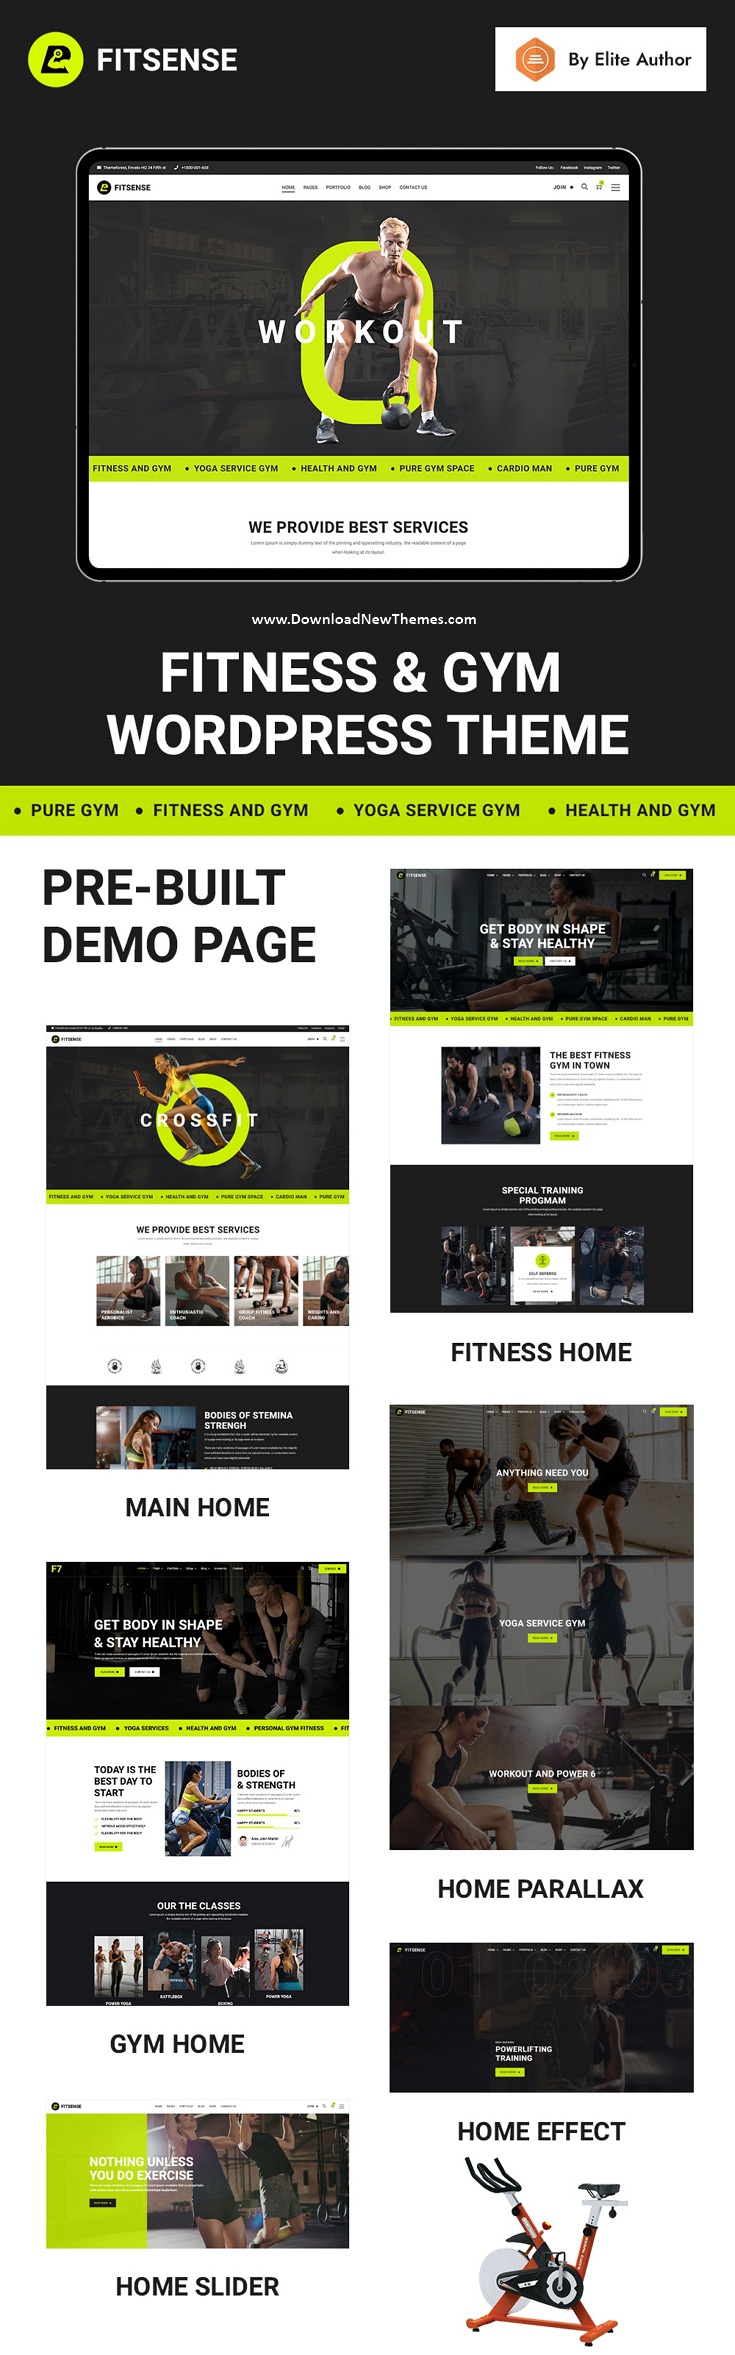 Fitsense - Gym and Fitness WordPress Theme Review